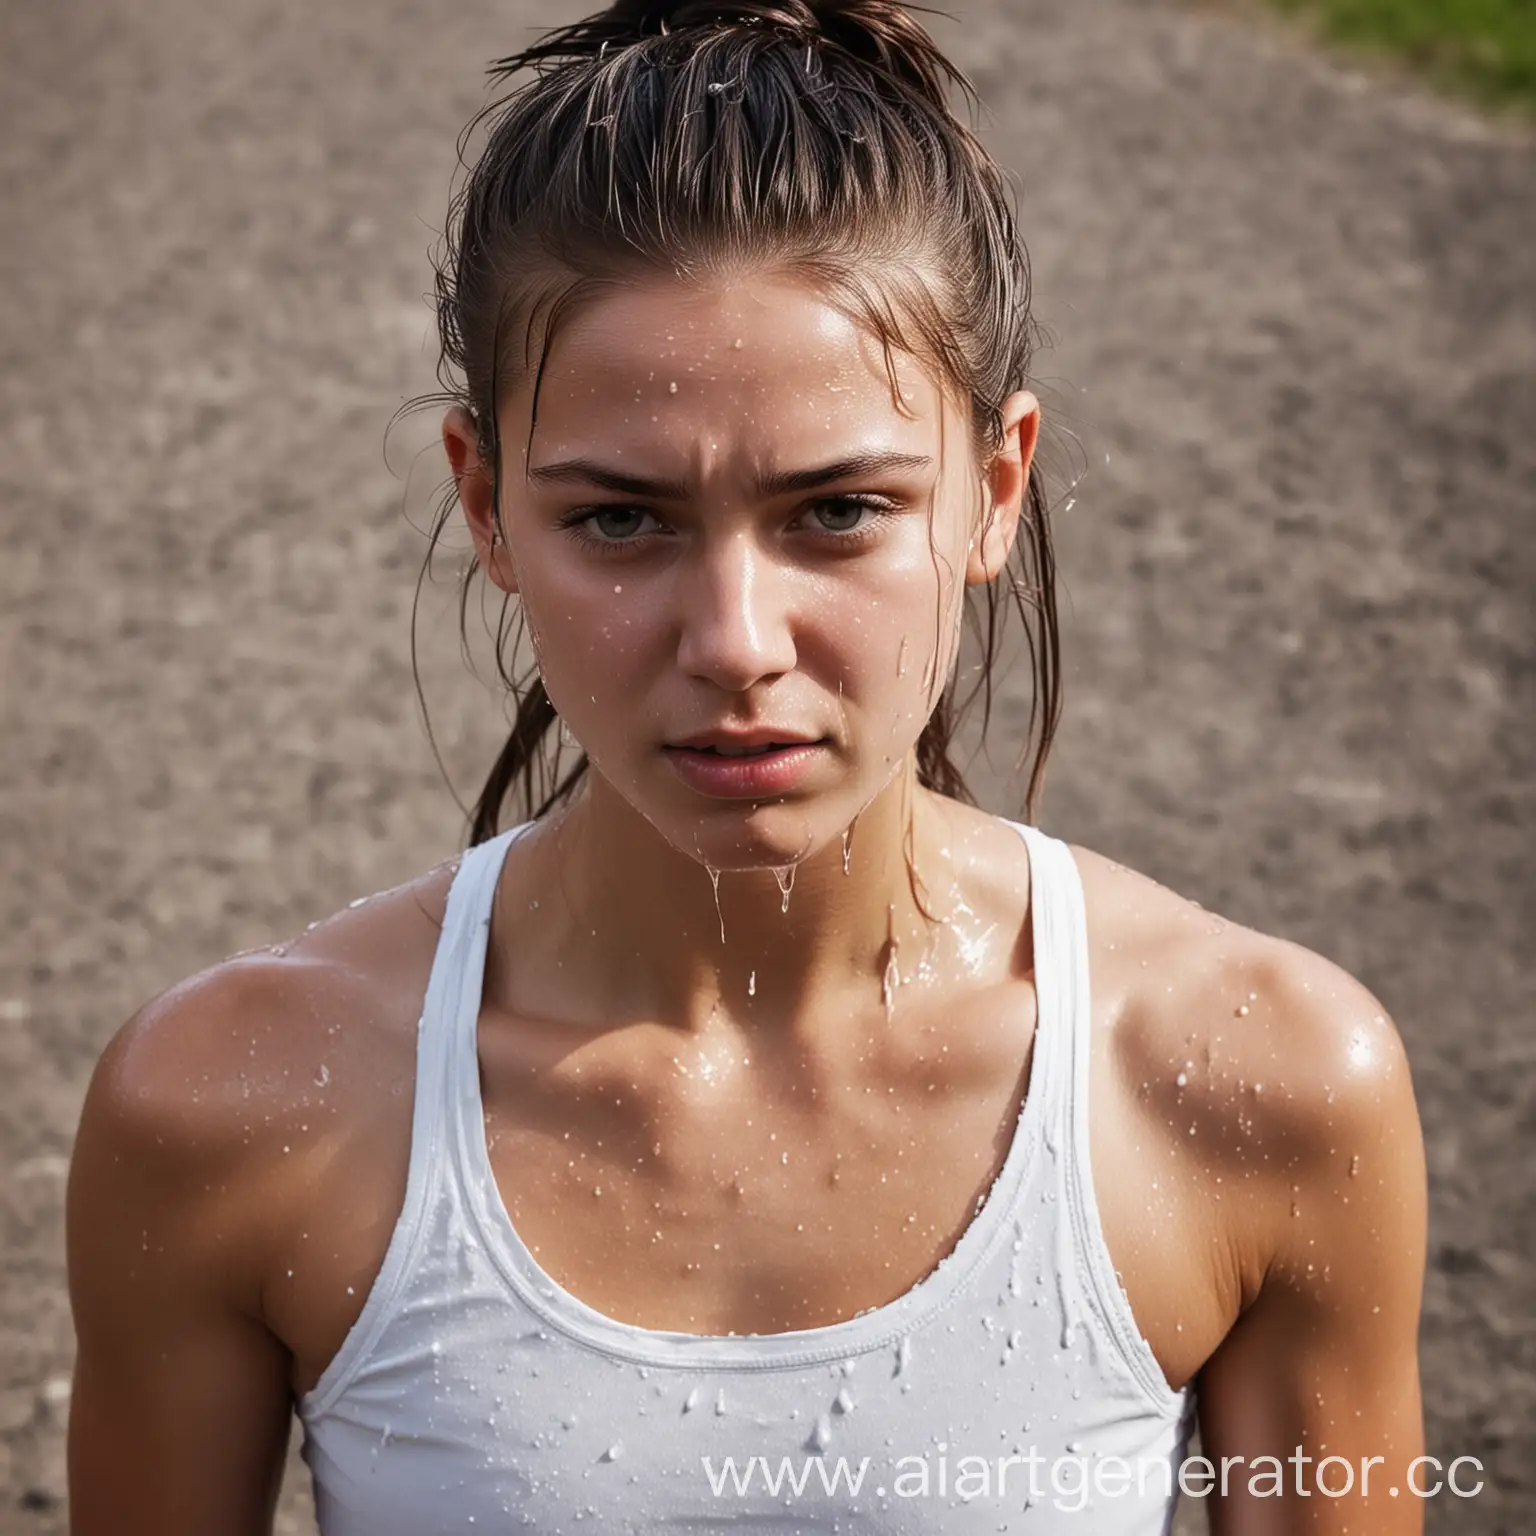 Intense-Training-Fatigued-16YearOld-Track-Athlete-Sweating-Profusely